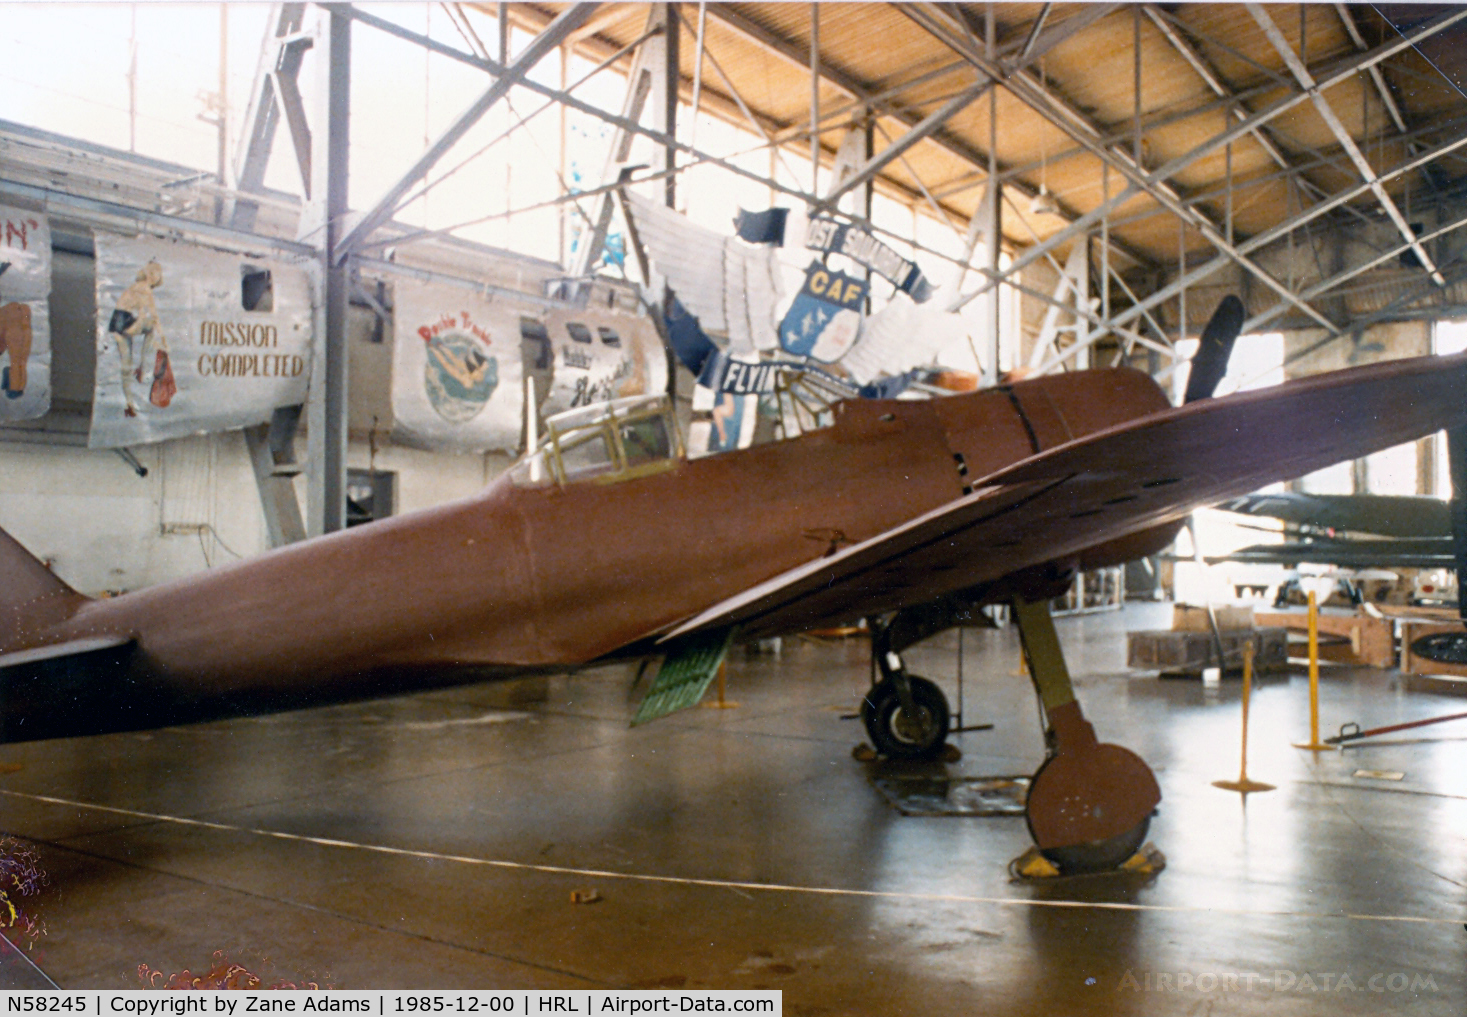 N58245, Mitsubishi A6M2-21 Zero C/N 807, CAF Zero at Harlingen - This aircraft is currently on display at the Pacific Aviation Museum Pearl Harbor